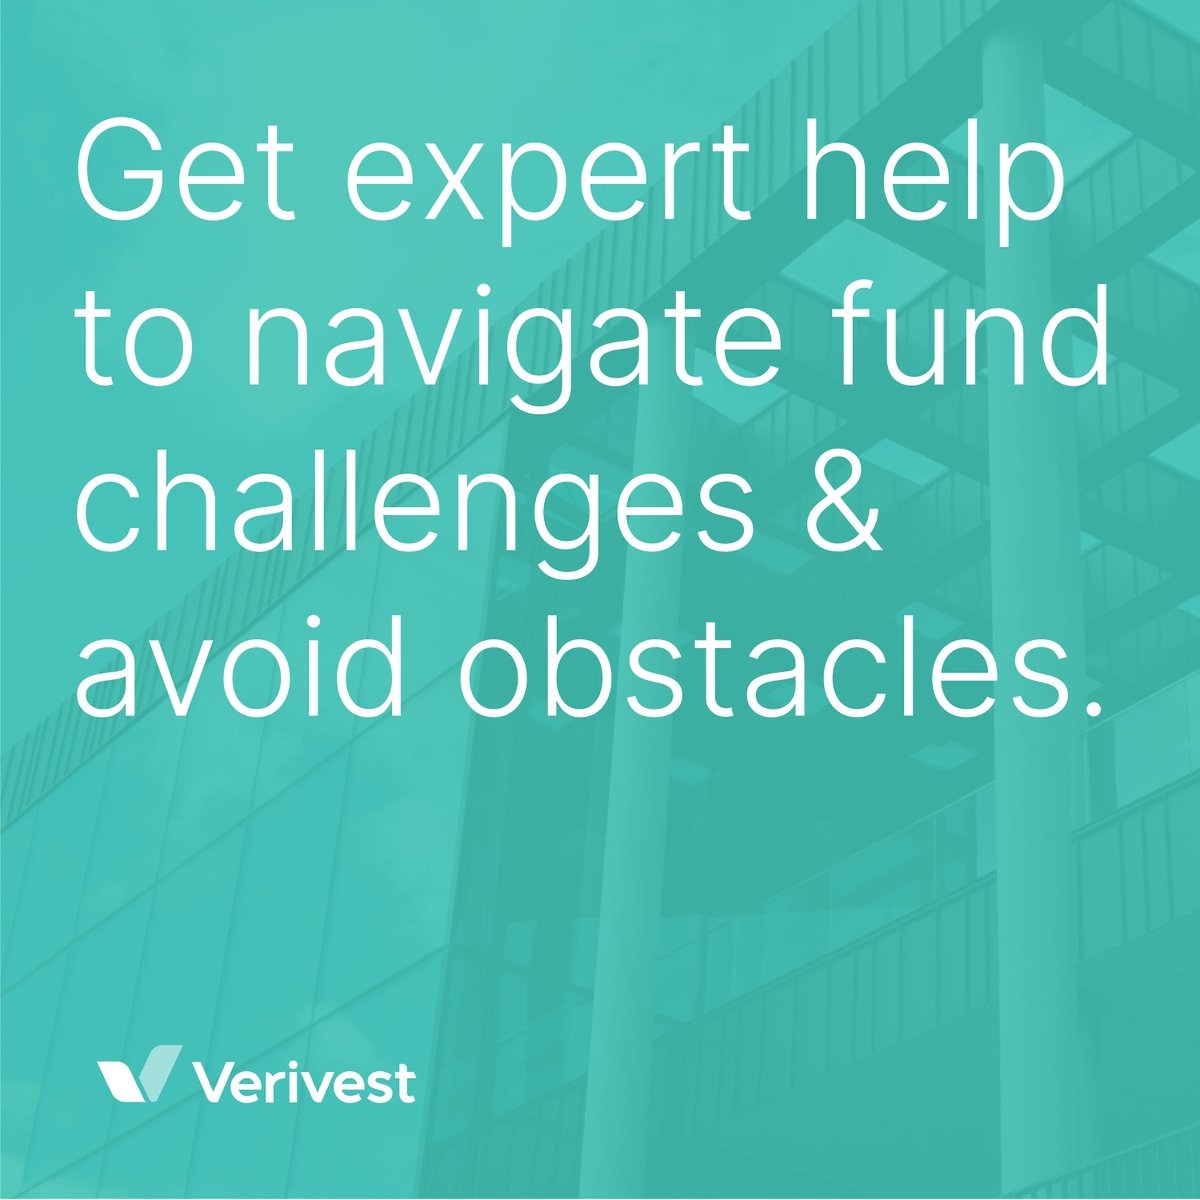 Venture into real estate fund management with our expert team guiding you - avoid getting lost with years of experience on your side. hubs.li/Q02tDm5H0
#FundAdvisory #FundManagement #Verivest